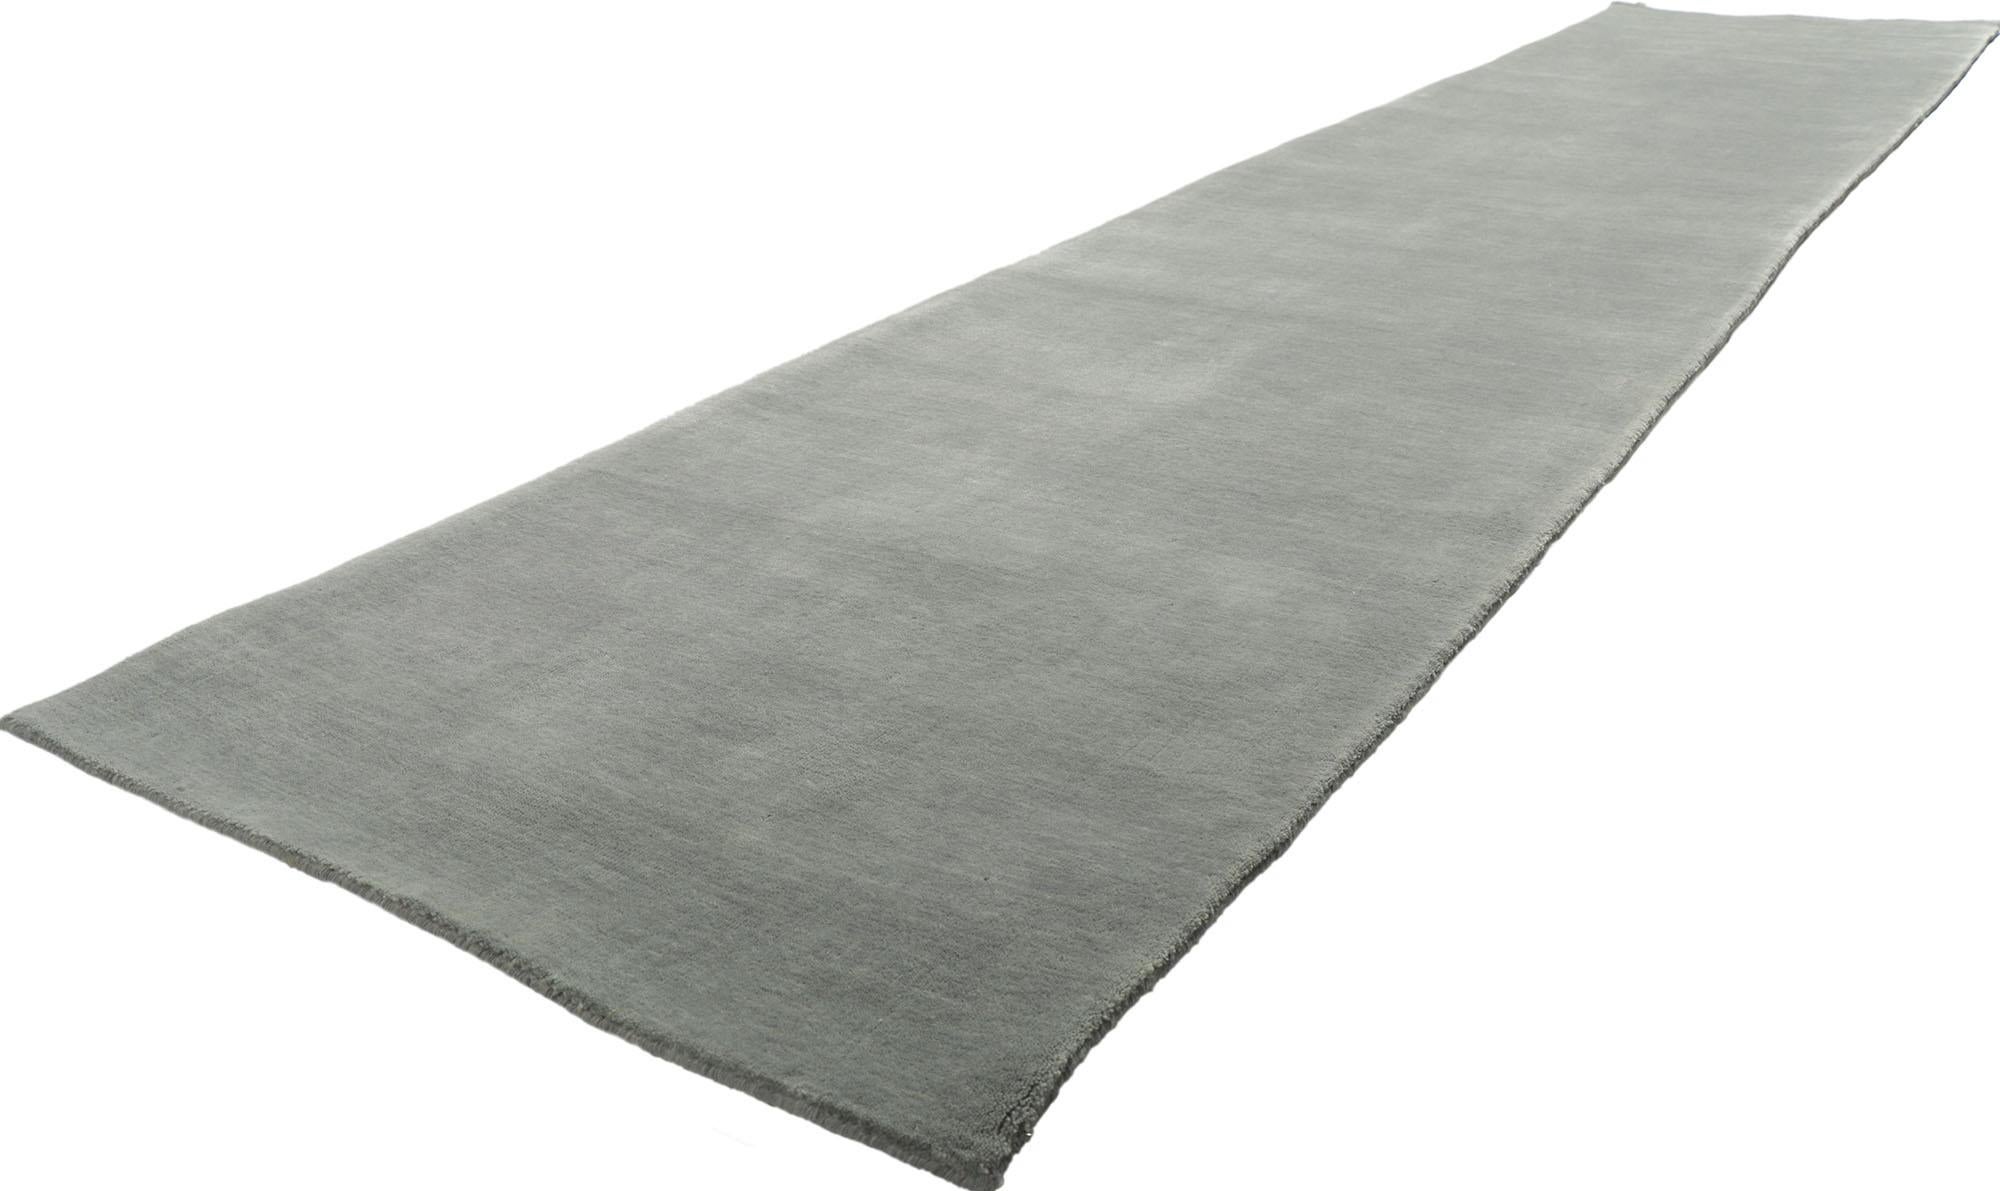 30746 New Contemporary grey rug runner with modern style 02'08 x 12'10. Effortless beauty combined with simplicity and modern style, this hand-loom wool contemporary Indian carpet runner provides a feeling of cozy contentment without the clutter.